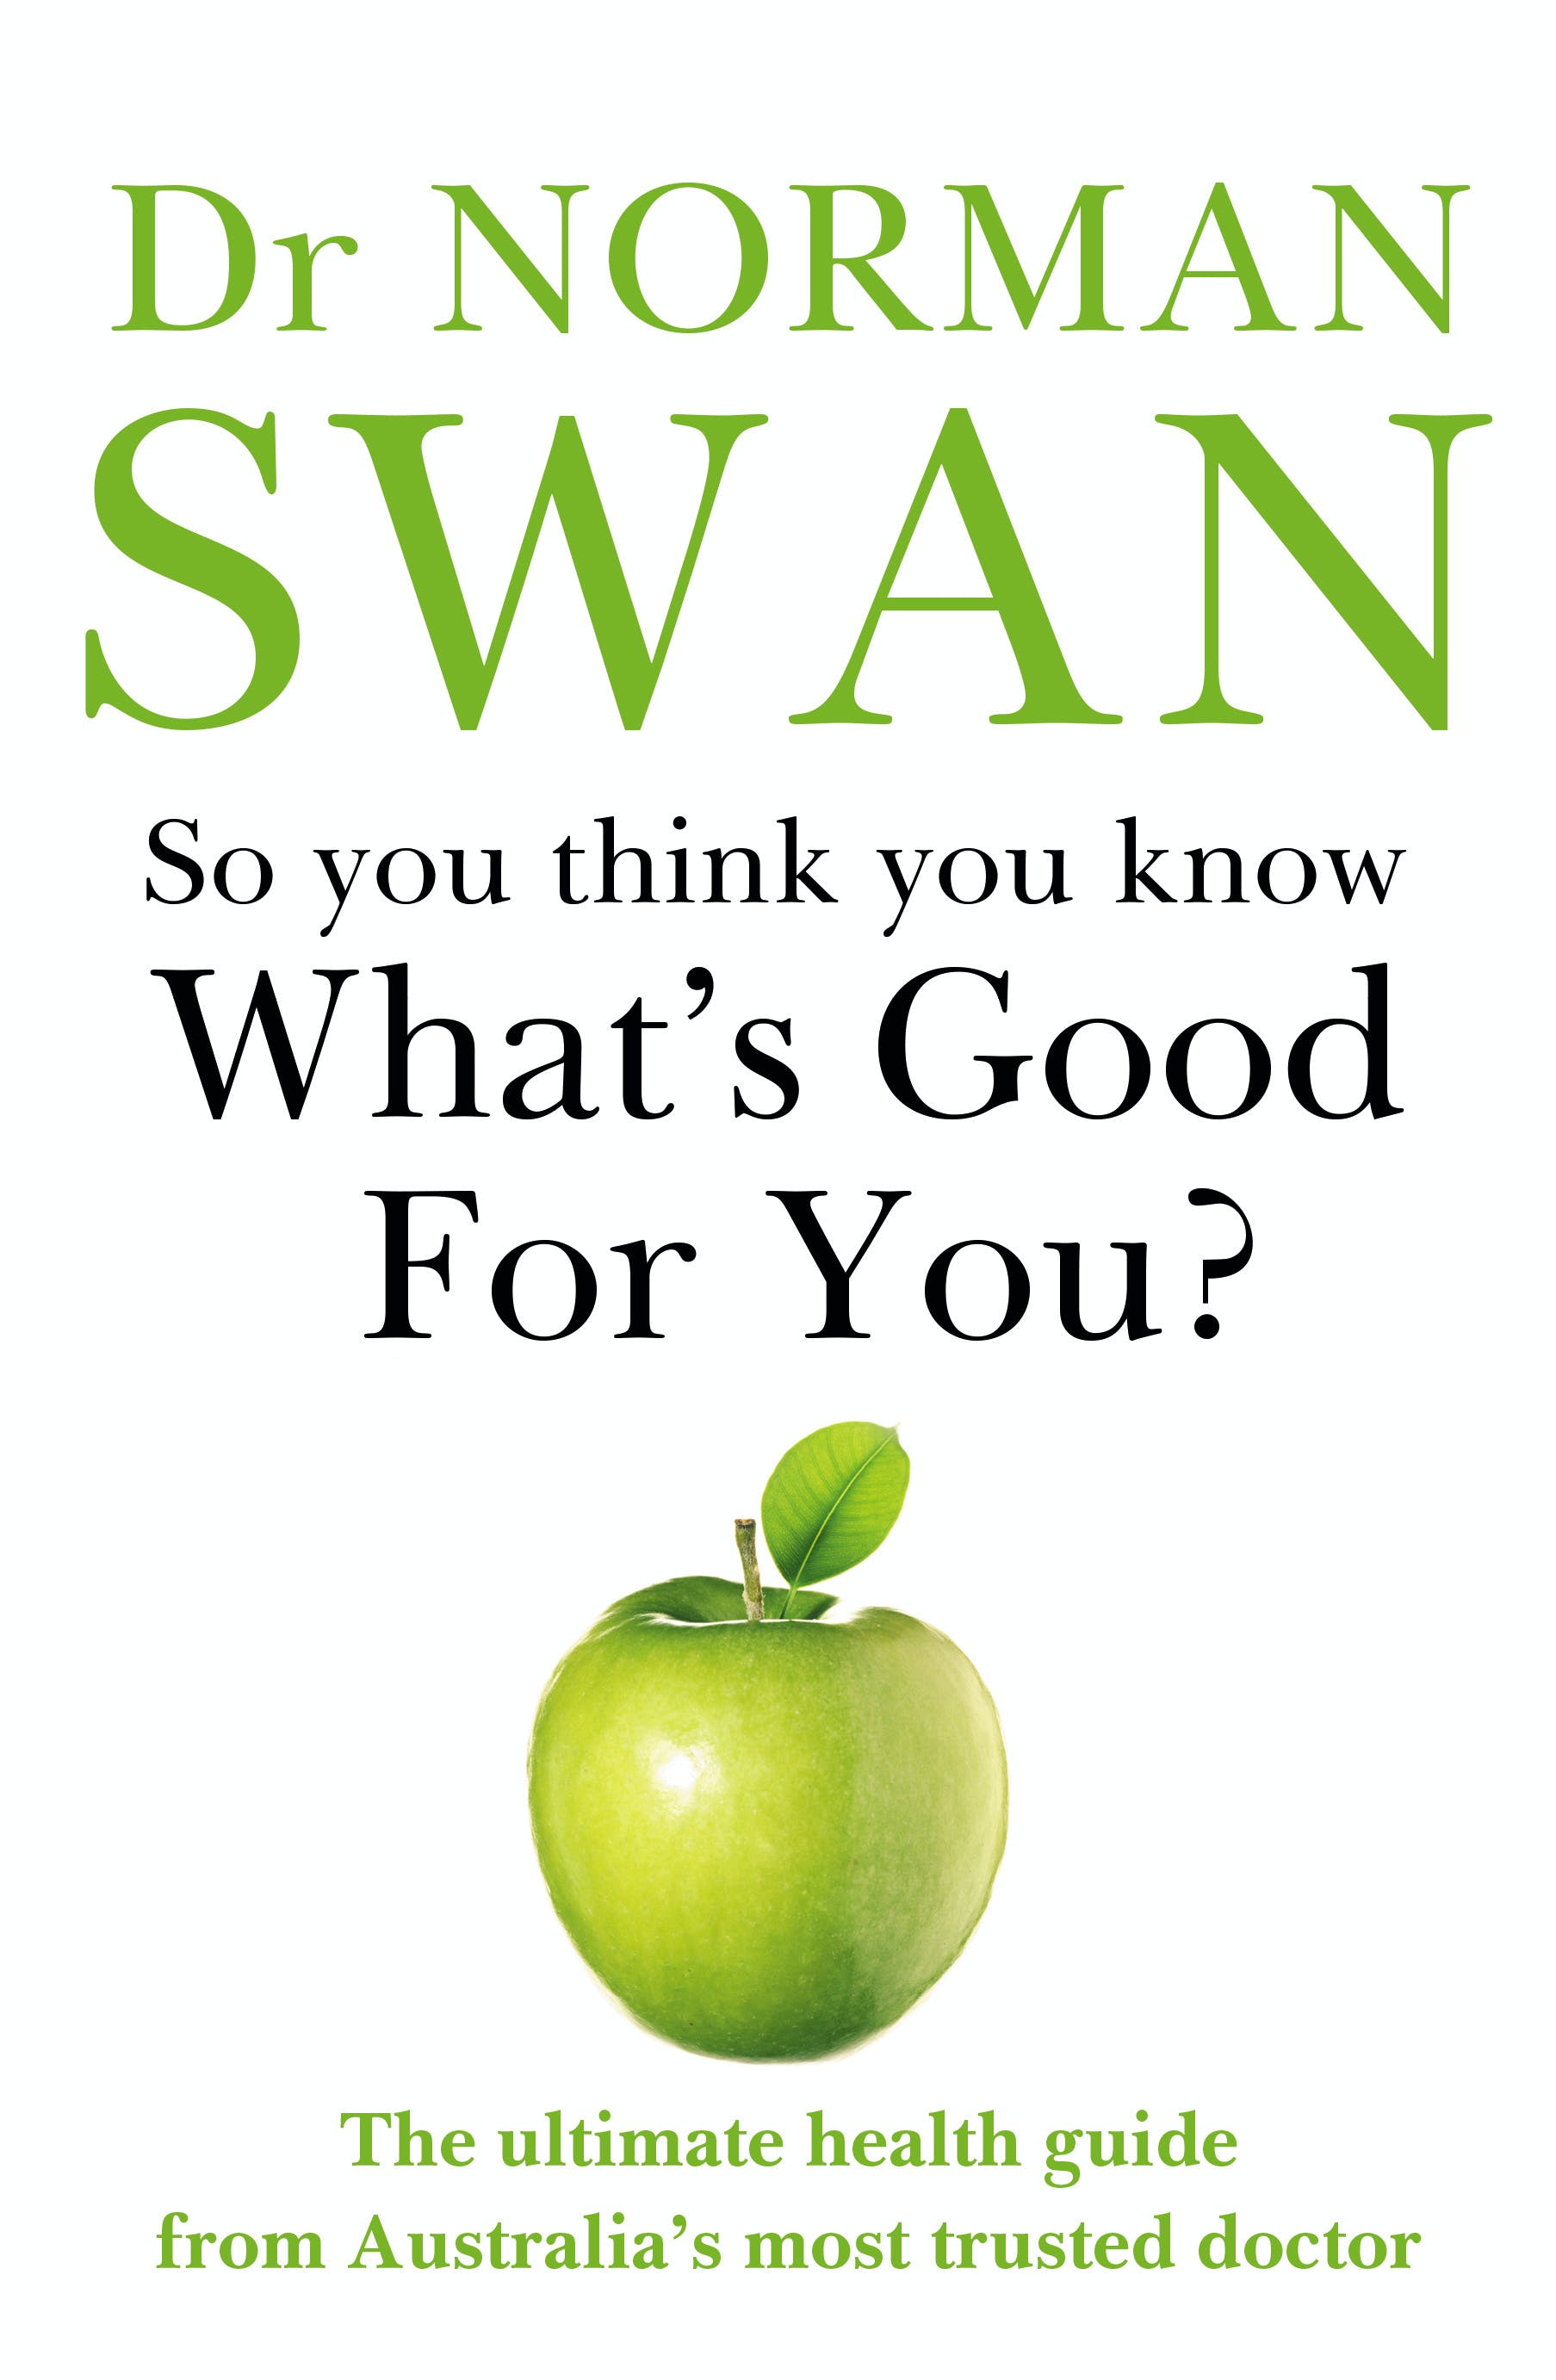 What's Good For You? book cover